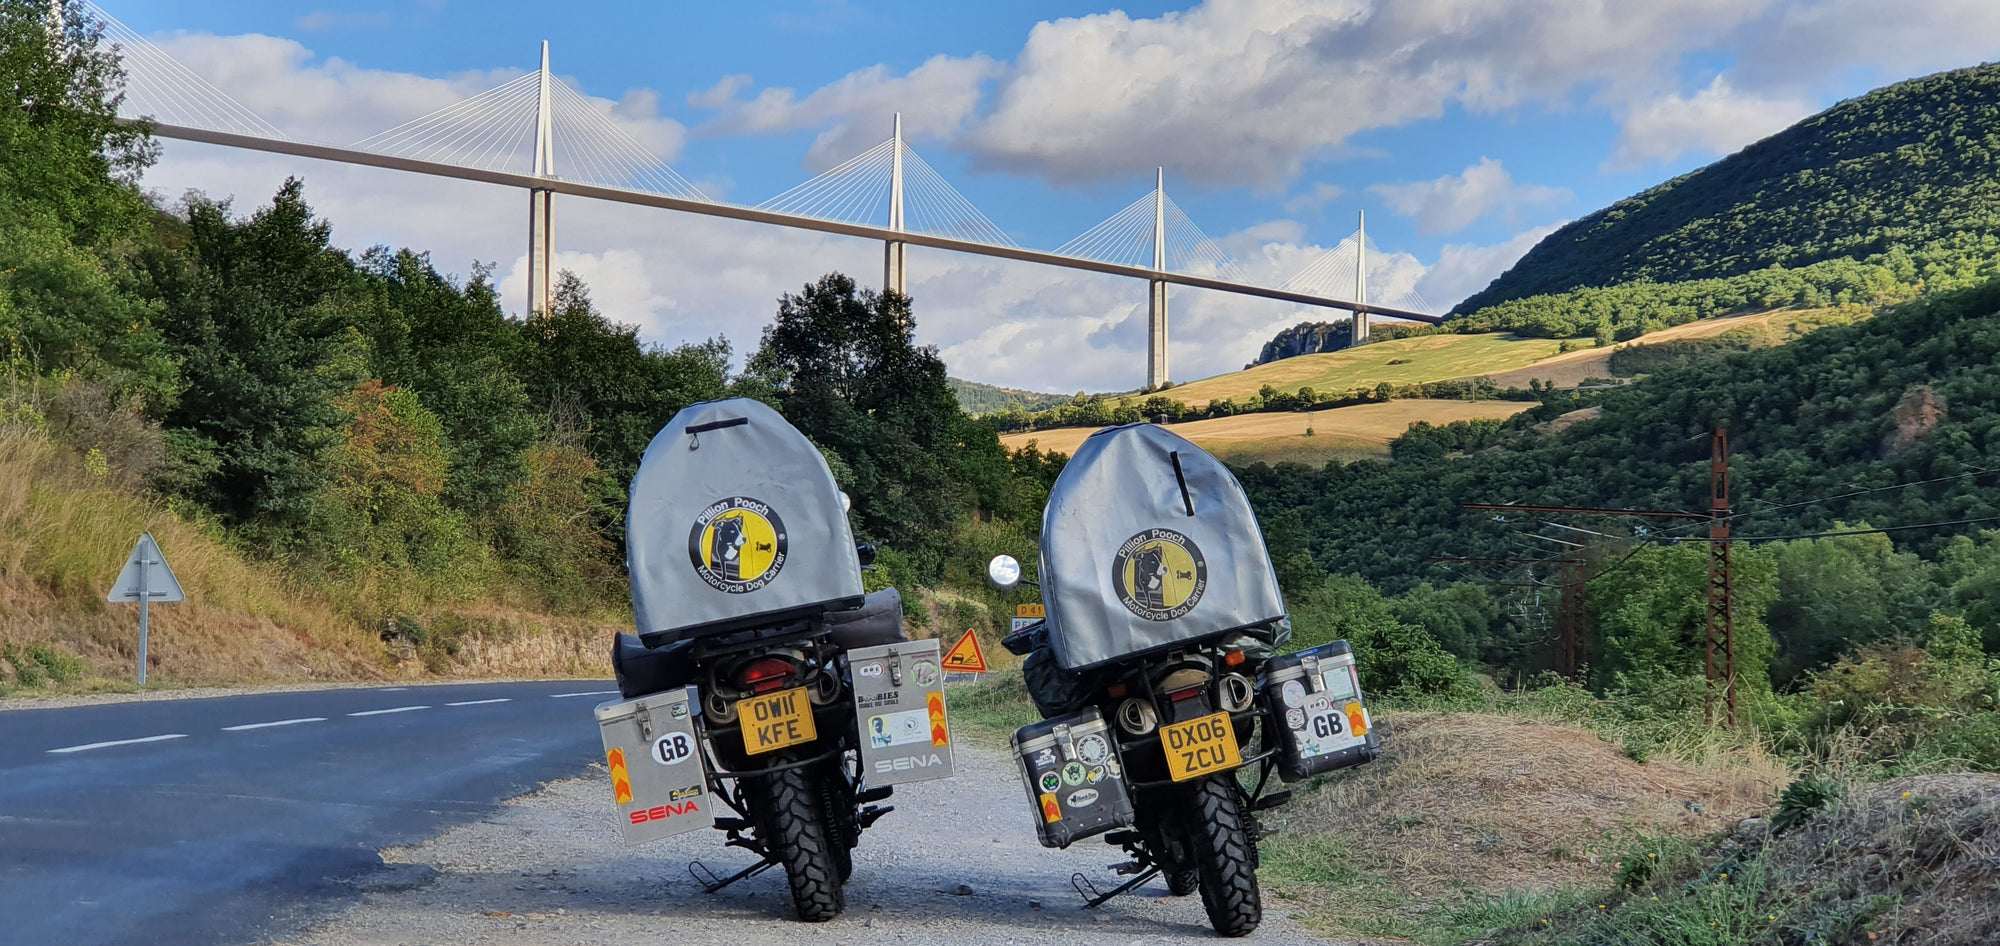 The Pack Track in France just before riding under the tallest bridge in the world, the Millau Viaduct. A great photo opportunity of our two Pillion Pooch's.